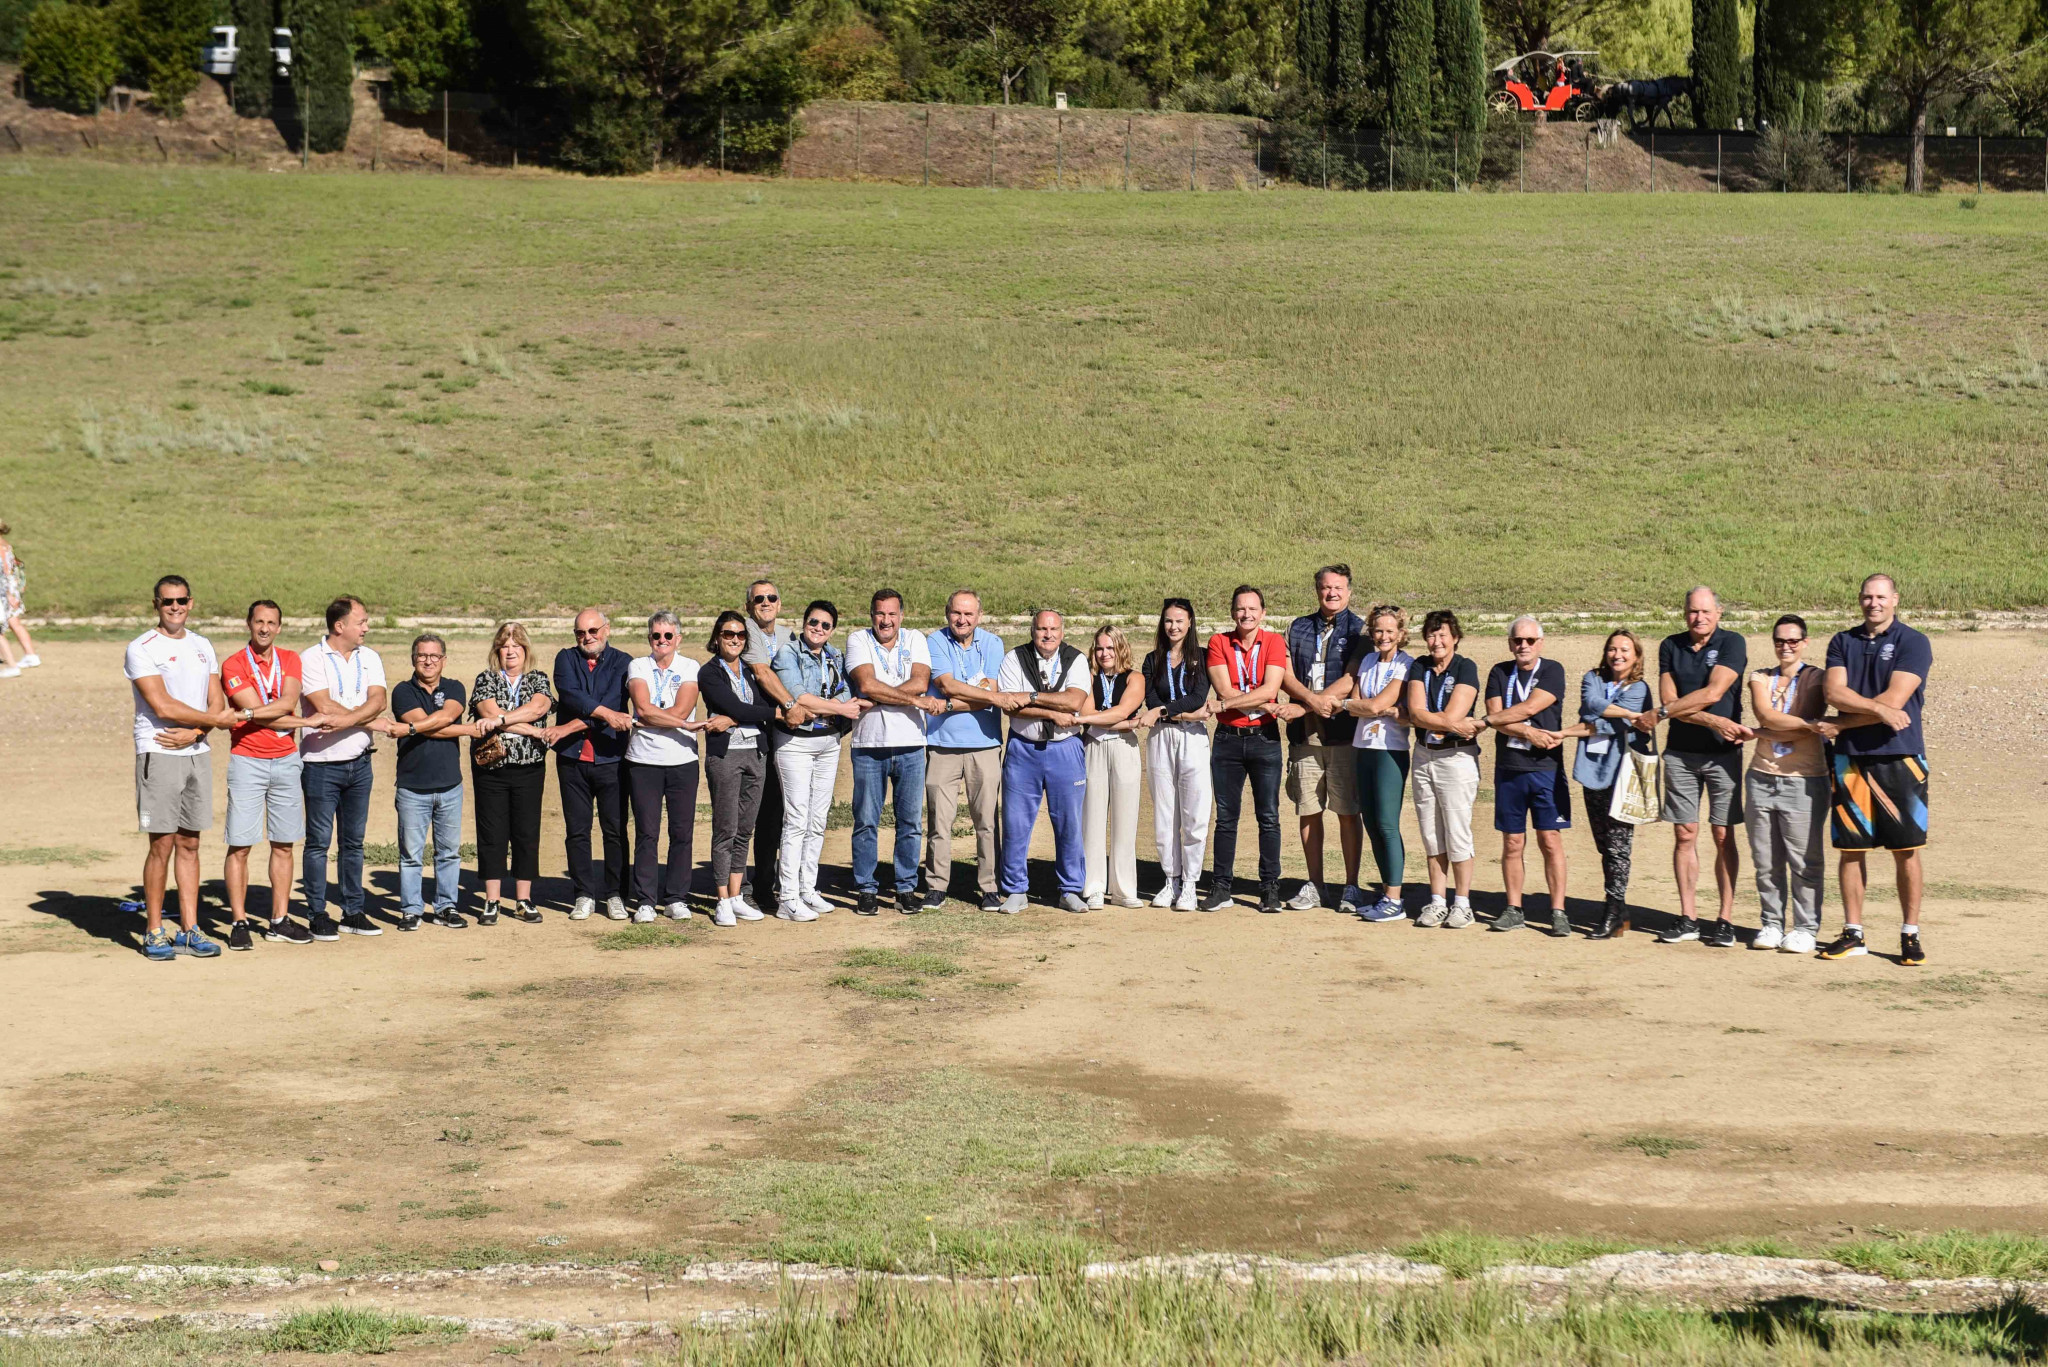 EOC members given tour of Ancient Olympia archaeological site before Seminar